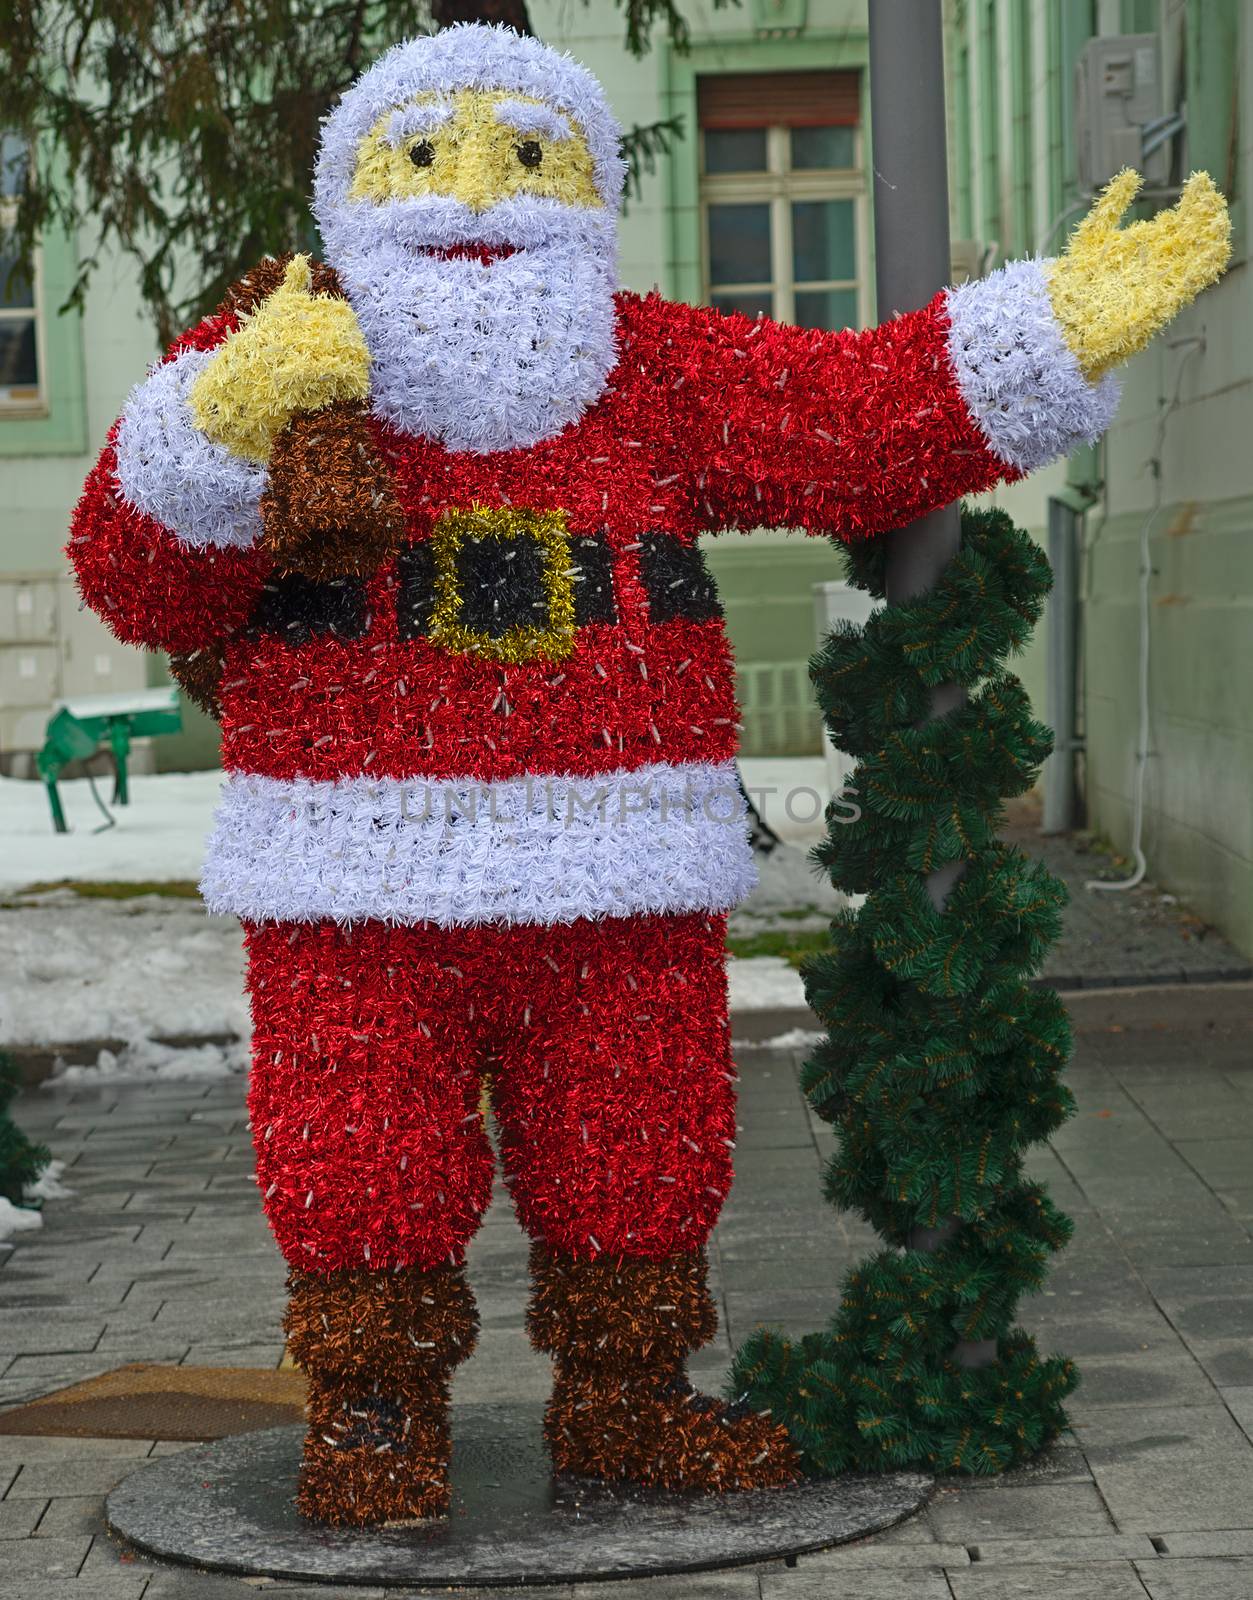 Santa Claus made out of Christmas decorations